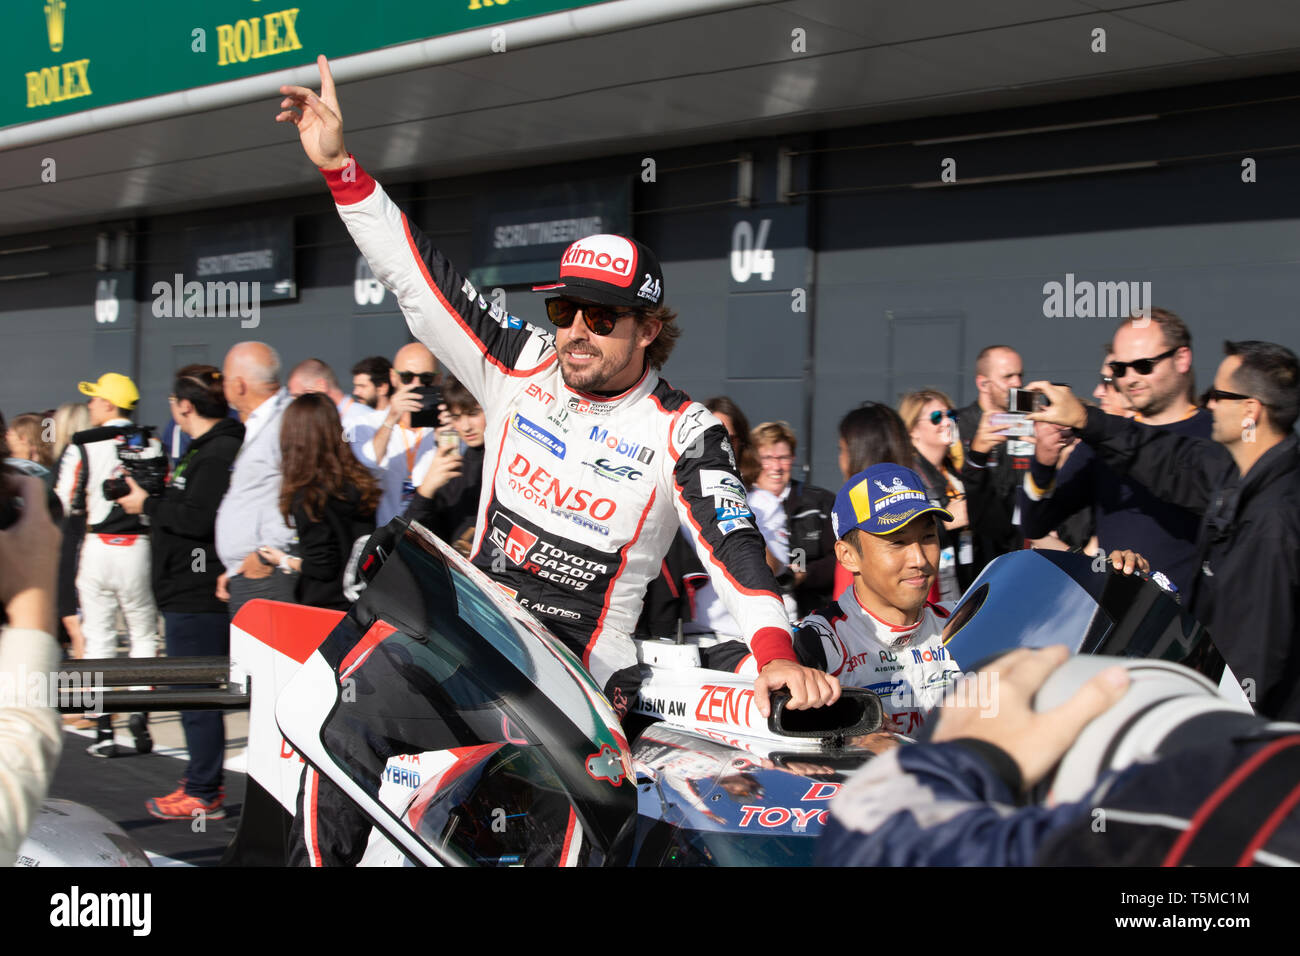 Fernando Alonso and Kamui Kobayashi celebrate victory with their car in the pit lane, WEC 6 Hours of Silverstone, 2018 Stock Photo